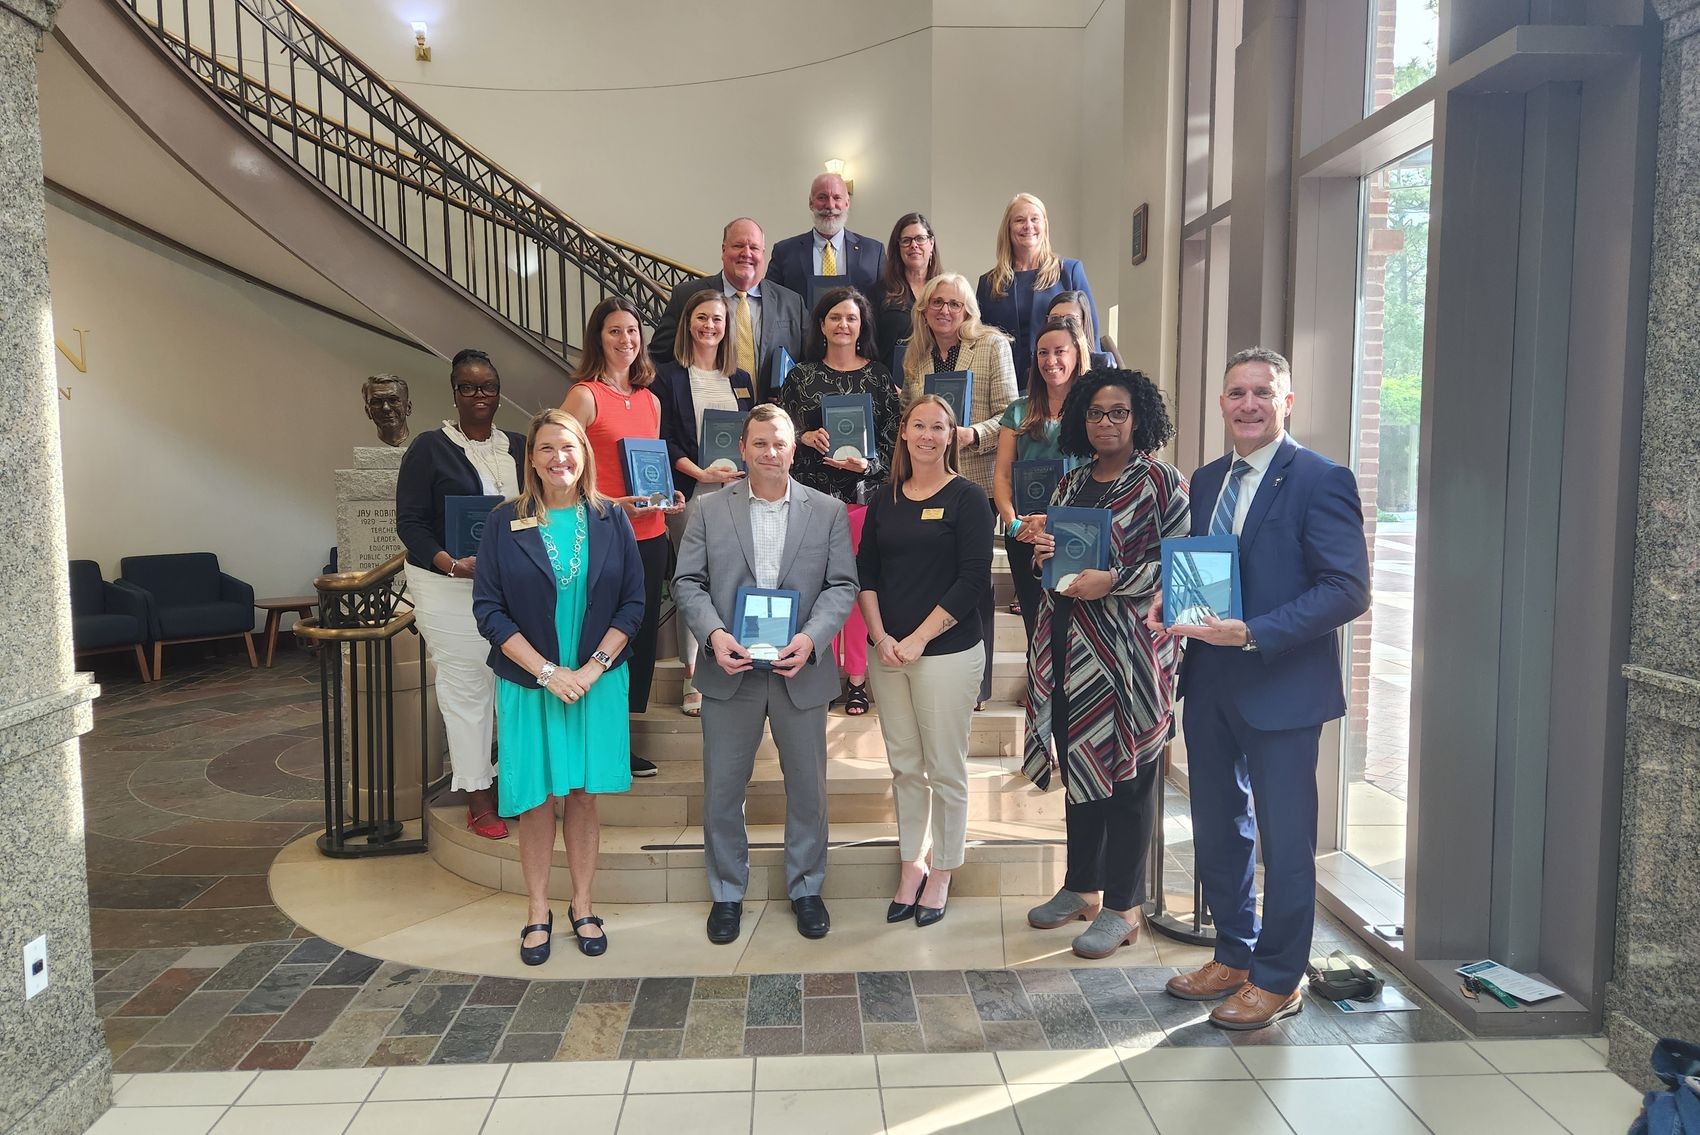 On April 30, WCE hosted an event to celebrate the re-signing of PDS school-university agreements, the national recognition recently received for the strength of WCE’s partnerships, and the WCE students who completed internships in PDS partnership schools this spring.